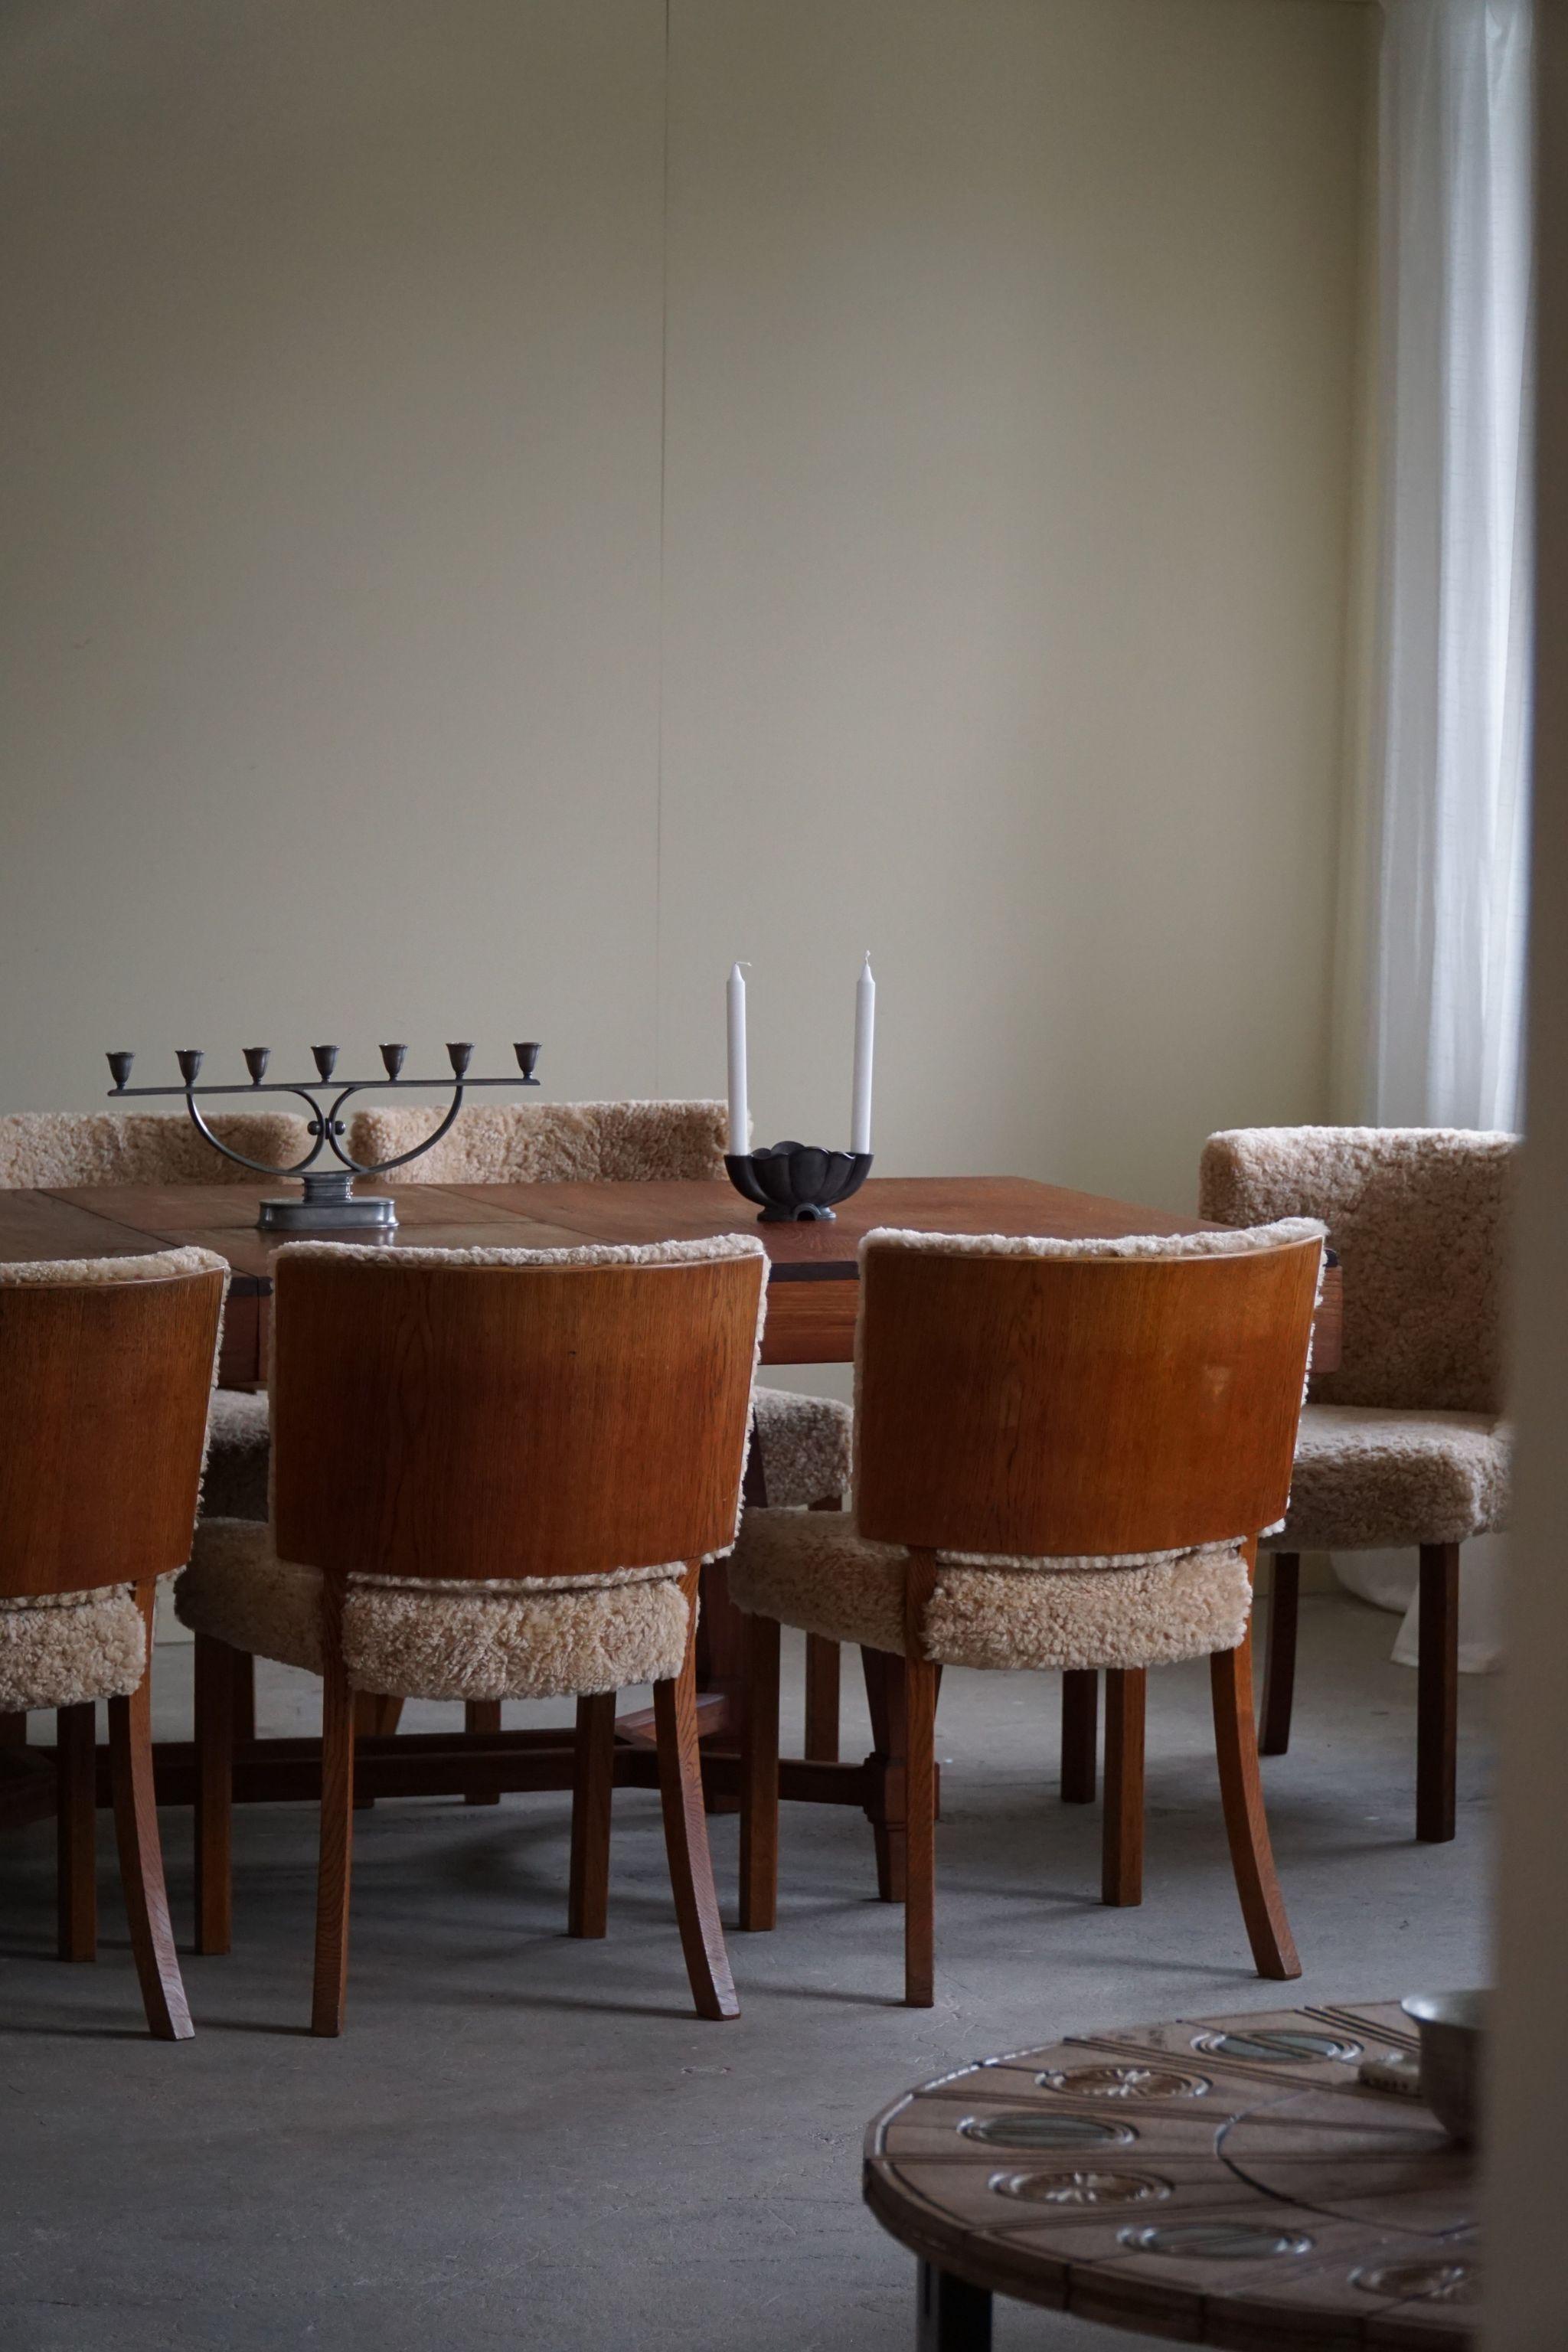 20th Century A set of 8 Dining Chairs in Oak and Lambswool, Danish Modern, Kaj Gottlob, 1950s For Sale